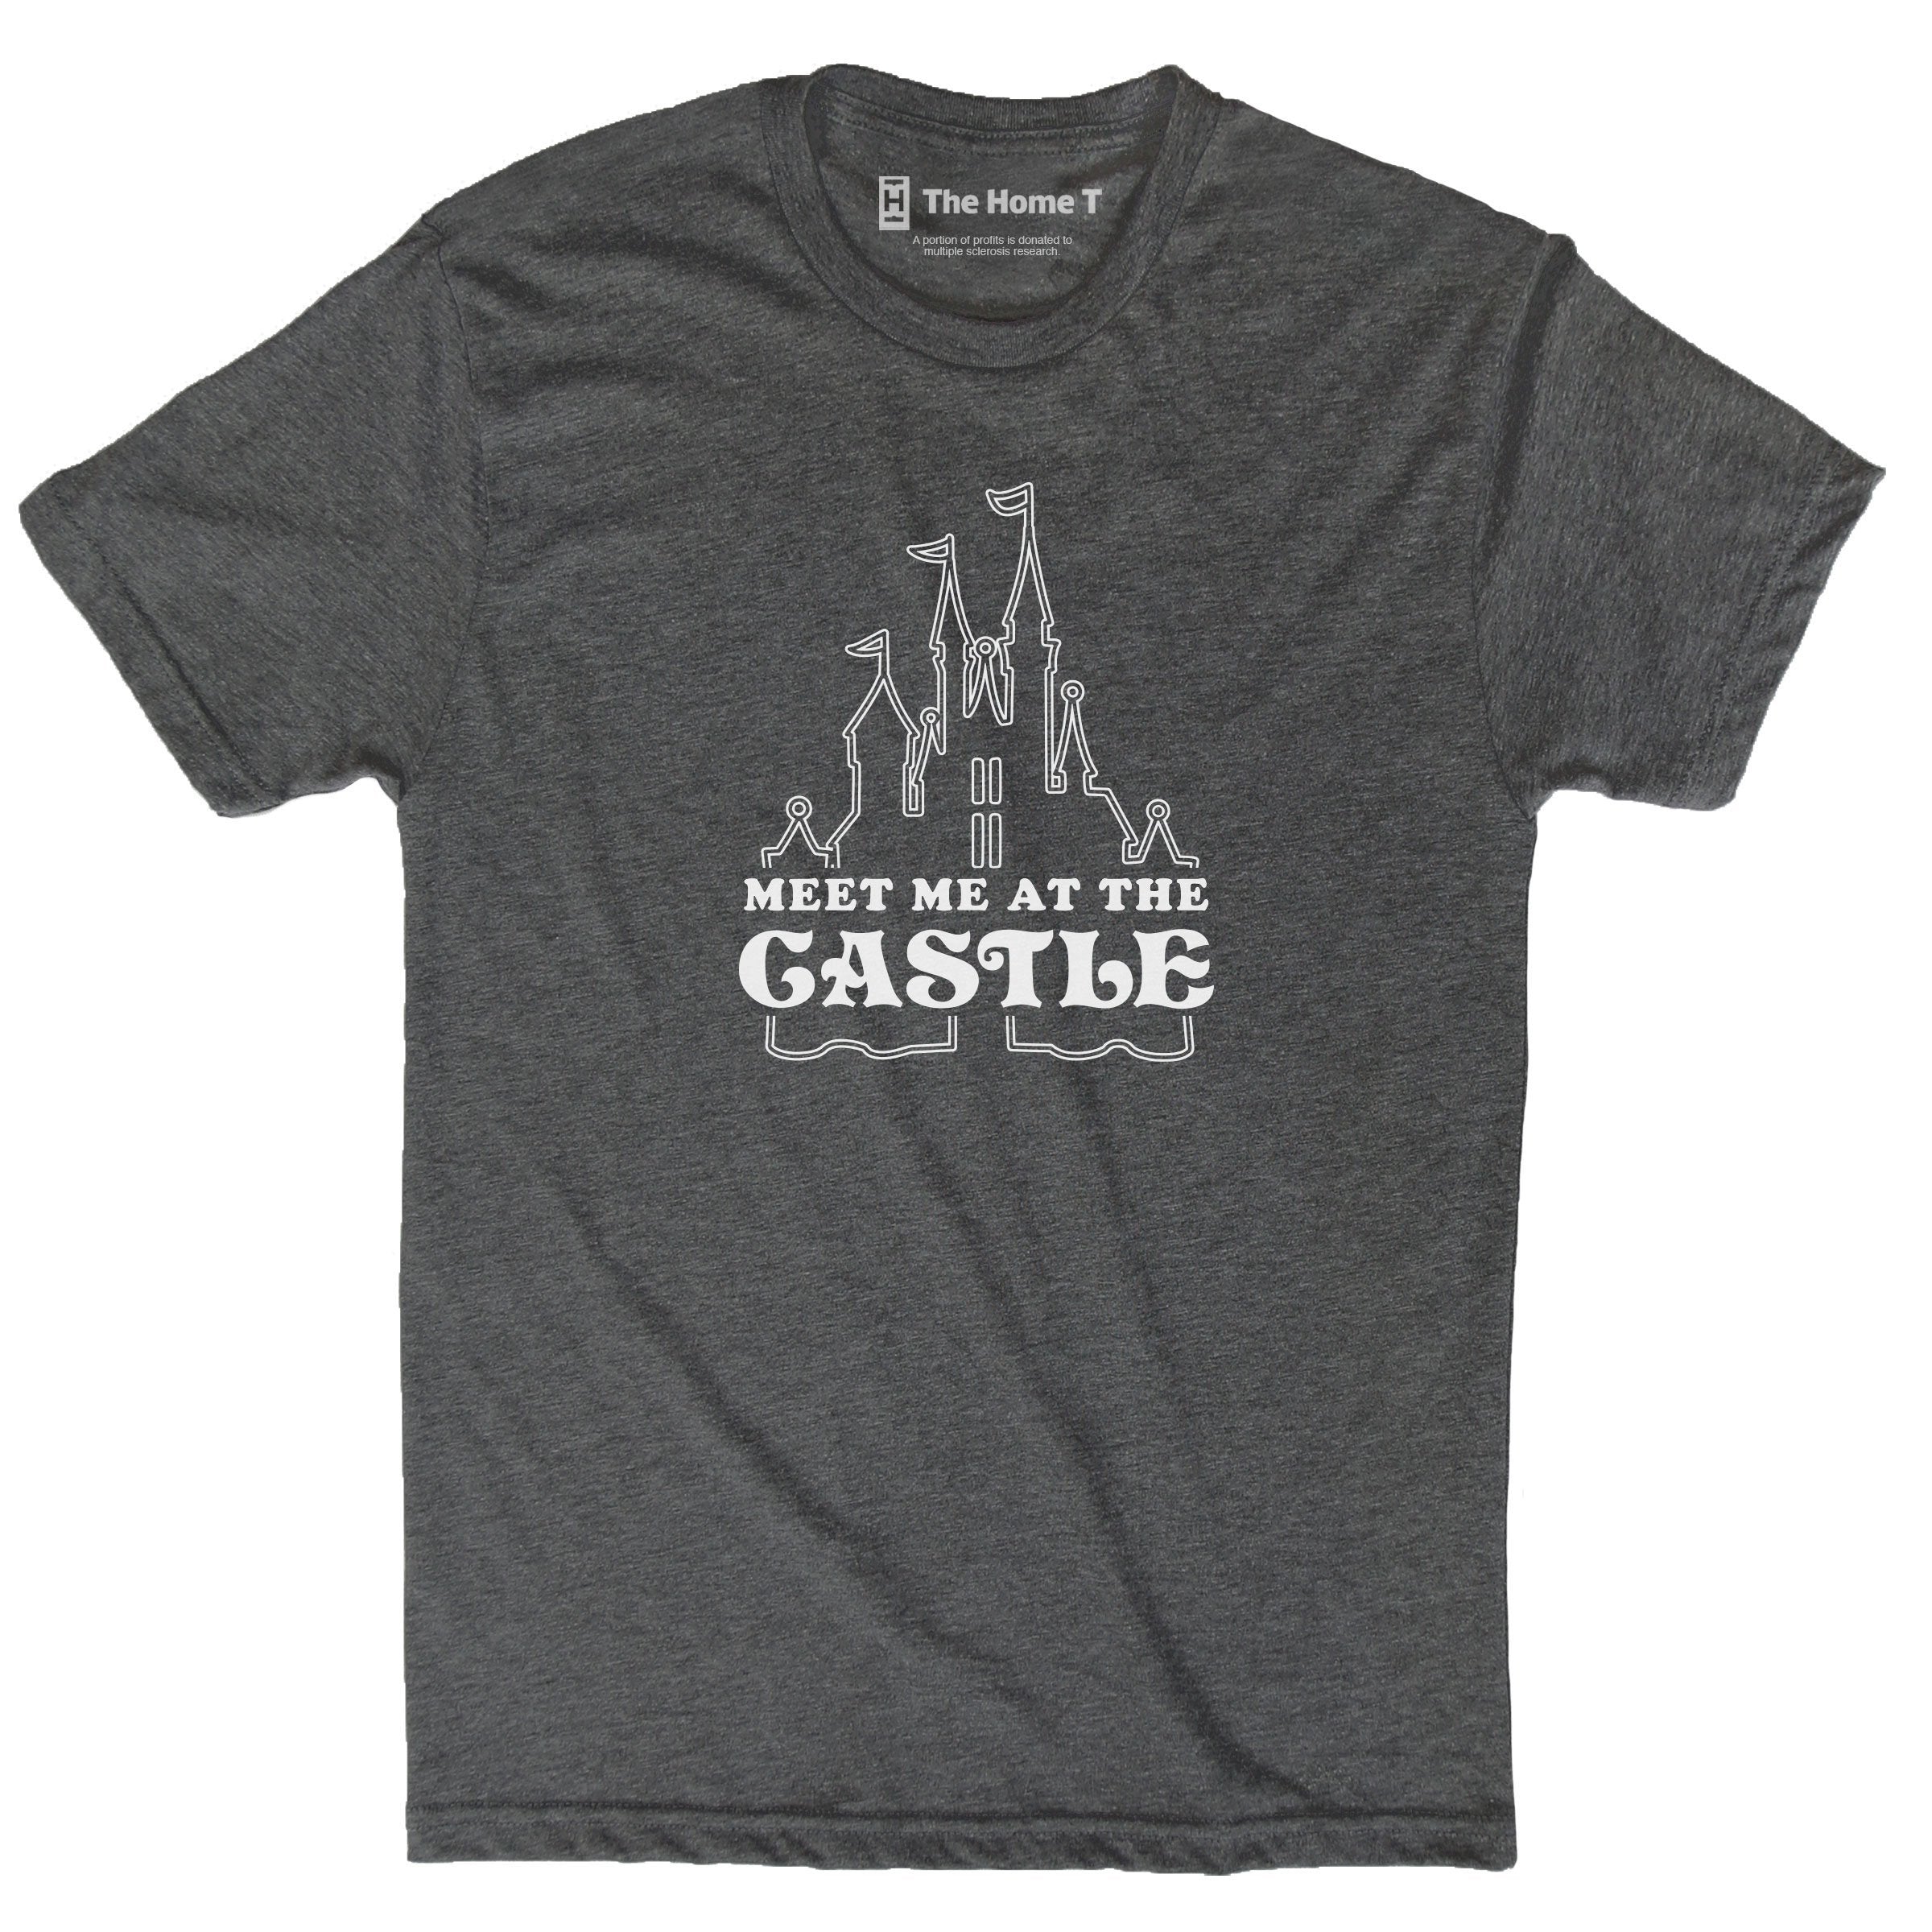 Meet Me At the Castle Crew neck The Home T XXL Dark Grey